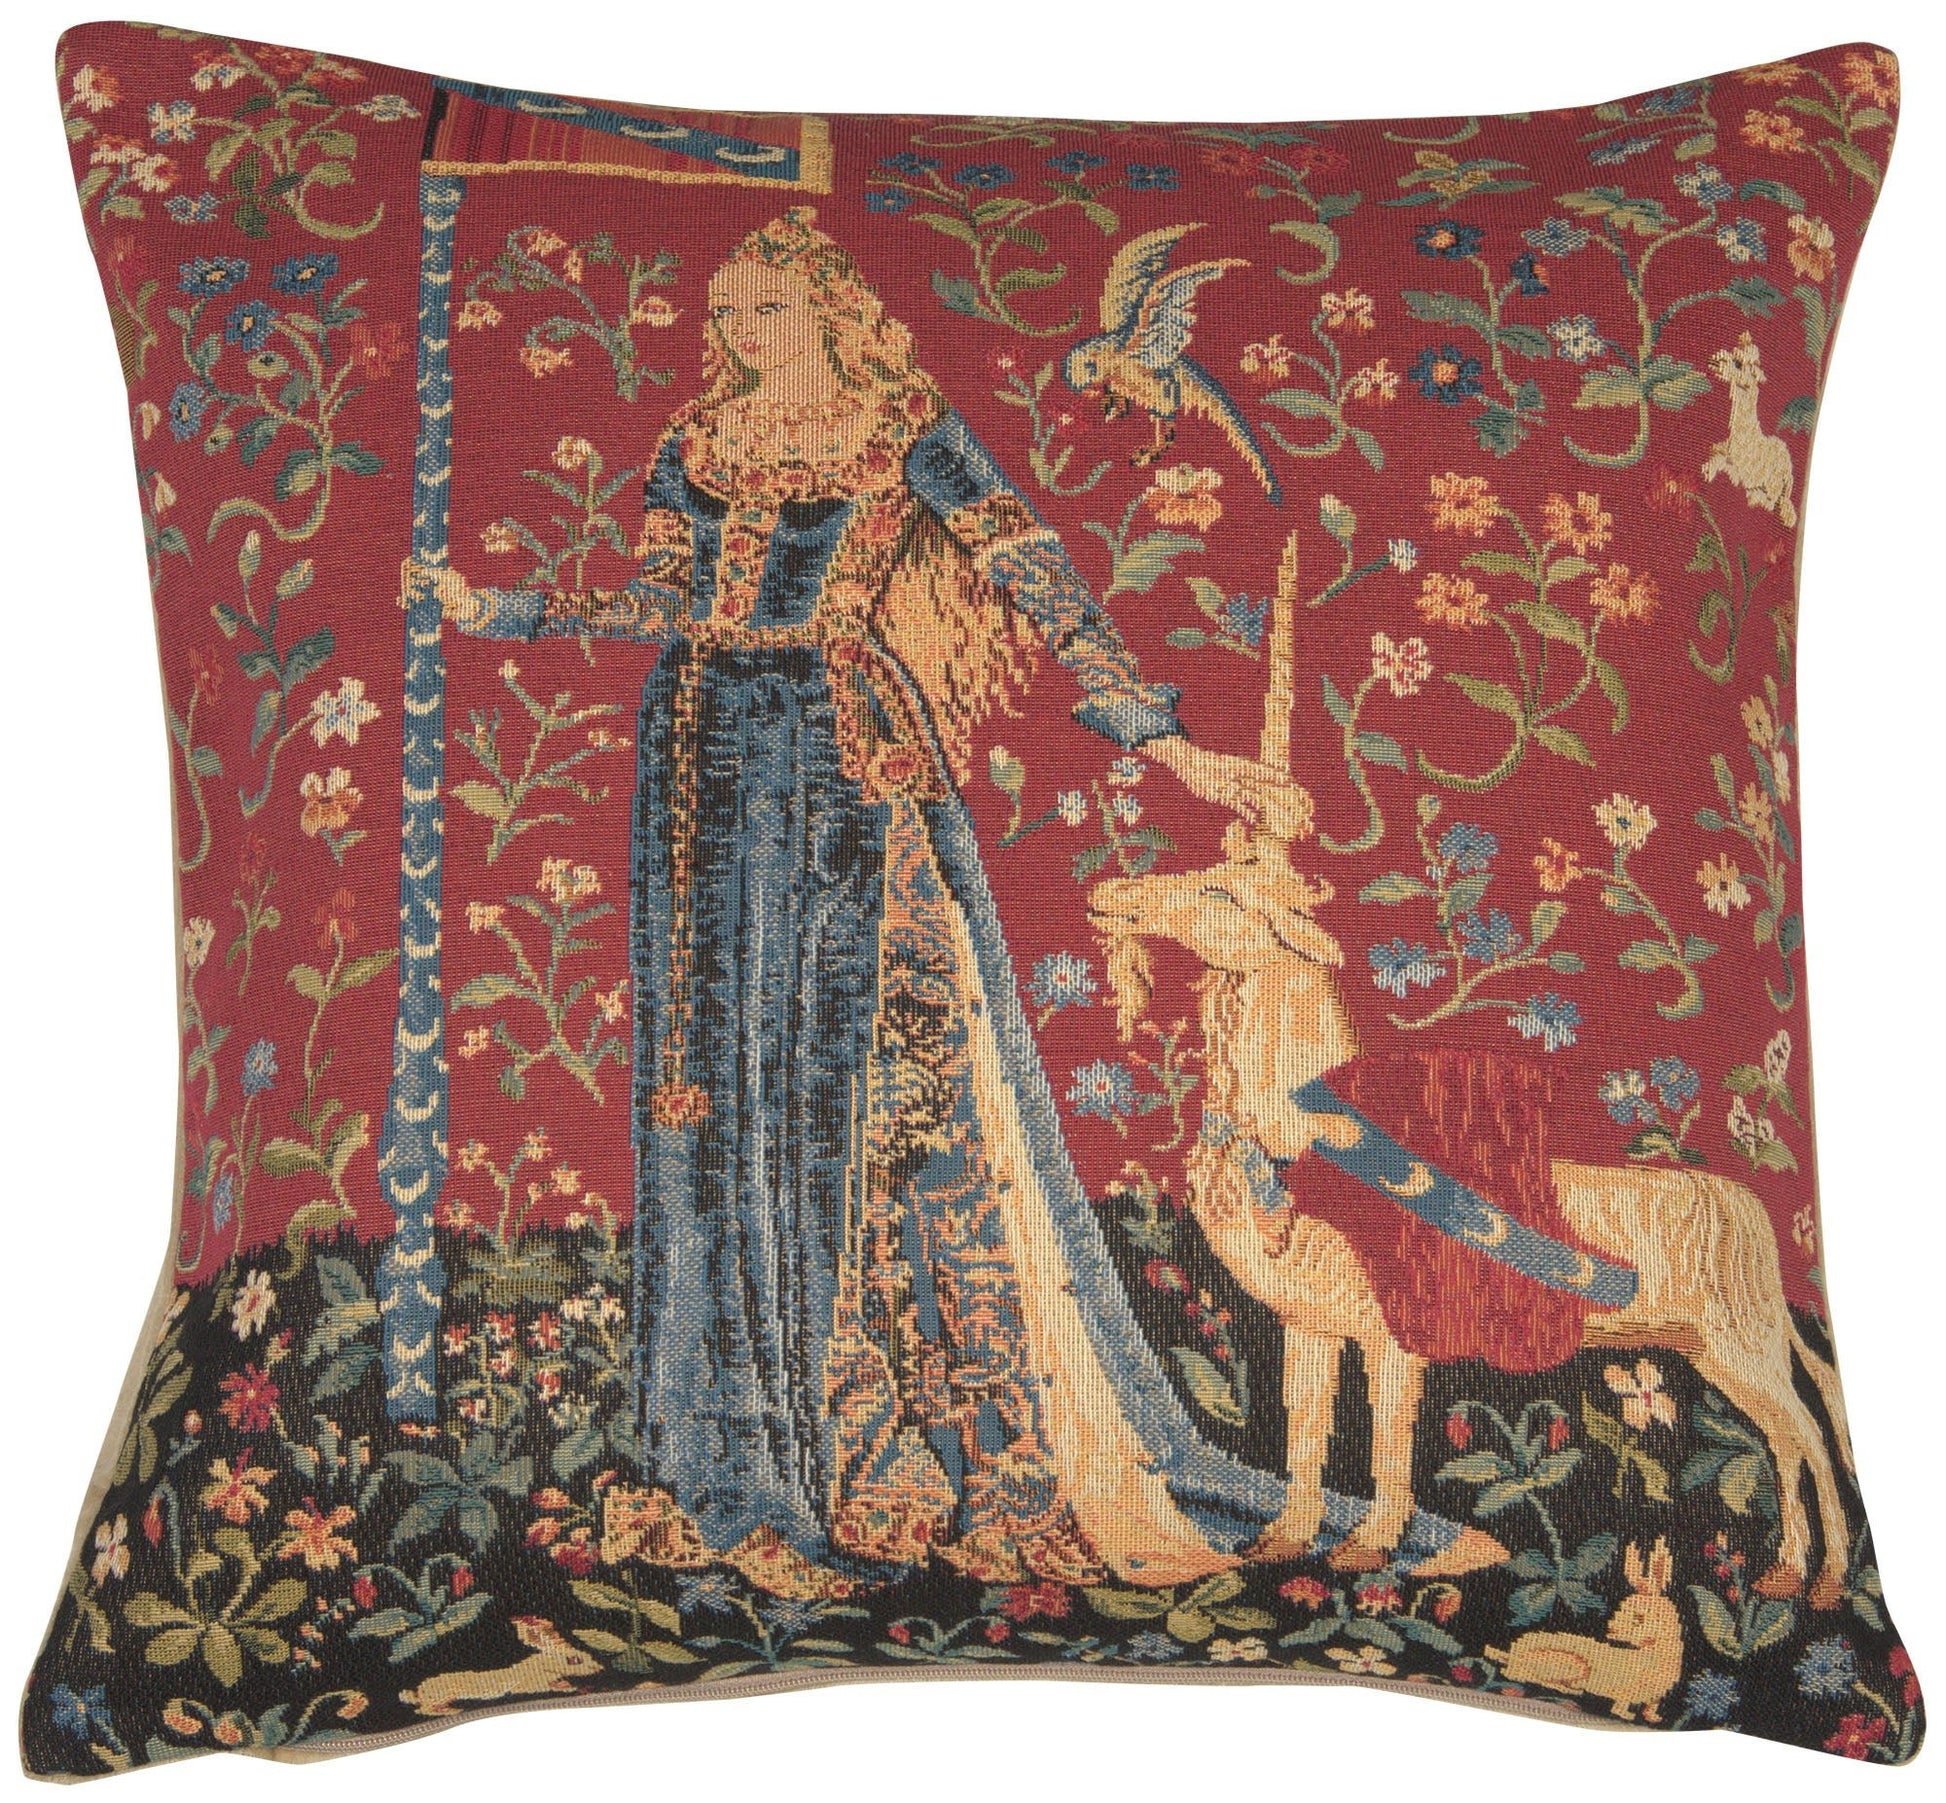 Medieval Touch Large European Cushion Covers - RoseStraya.com